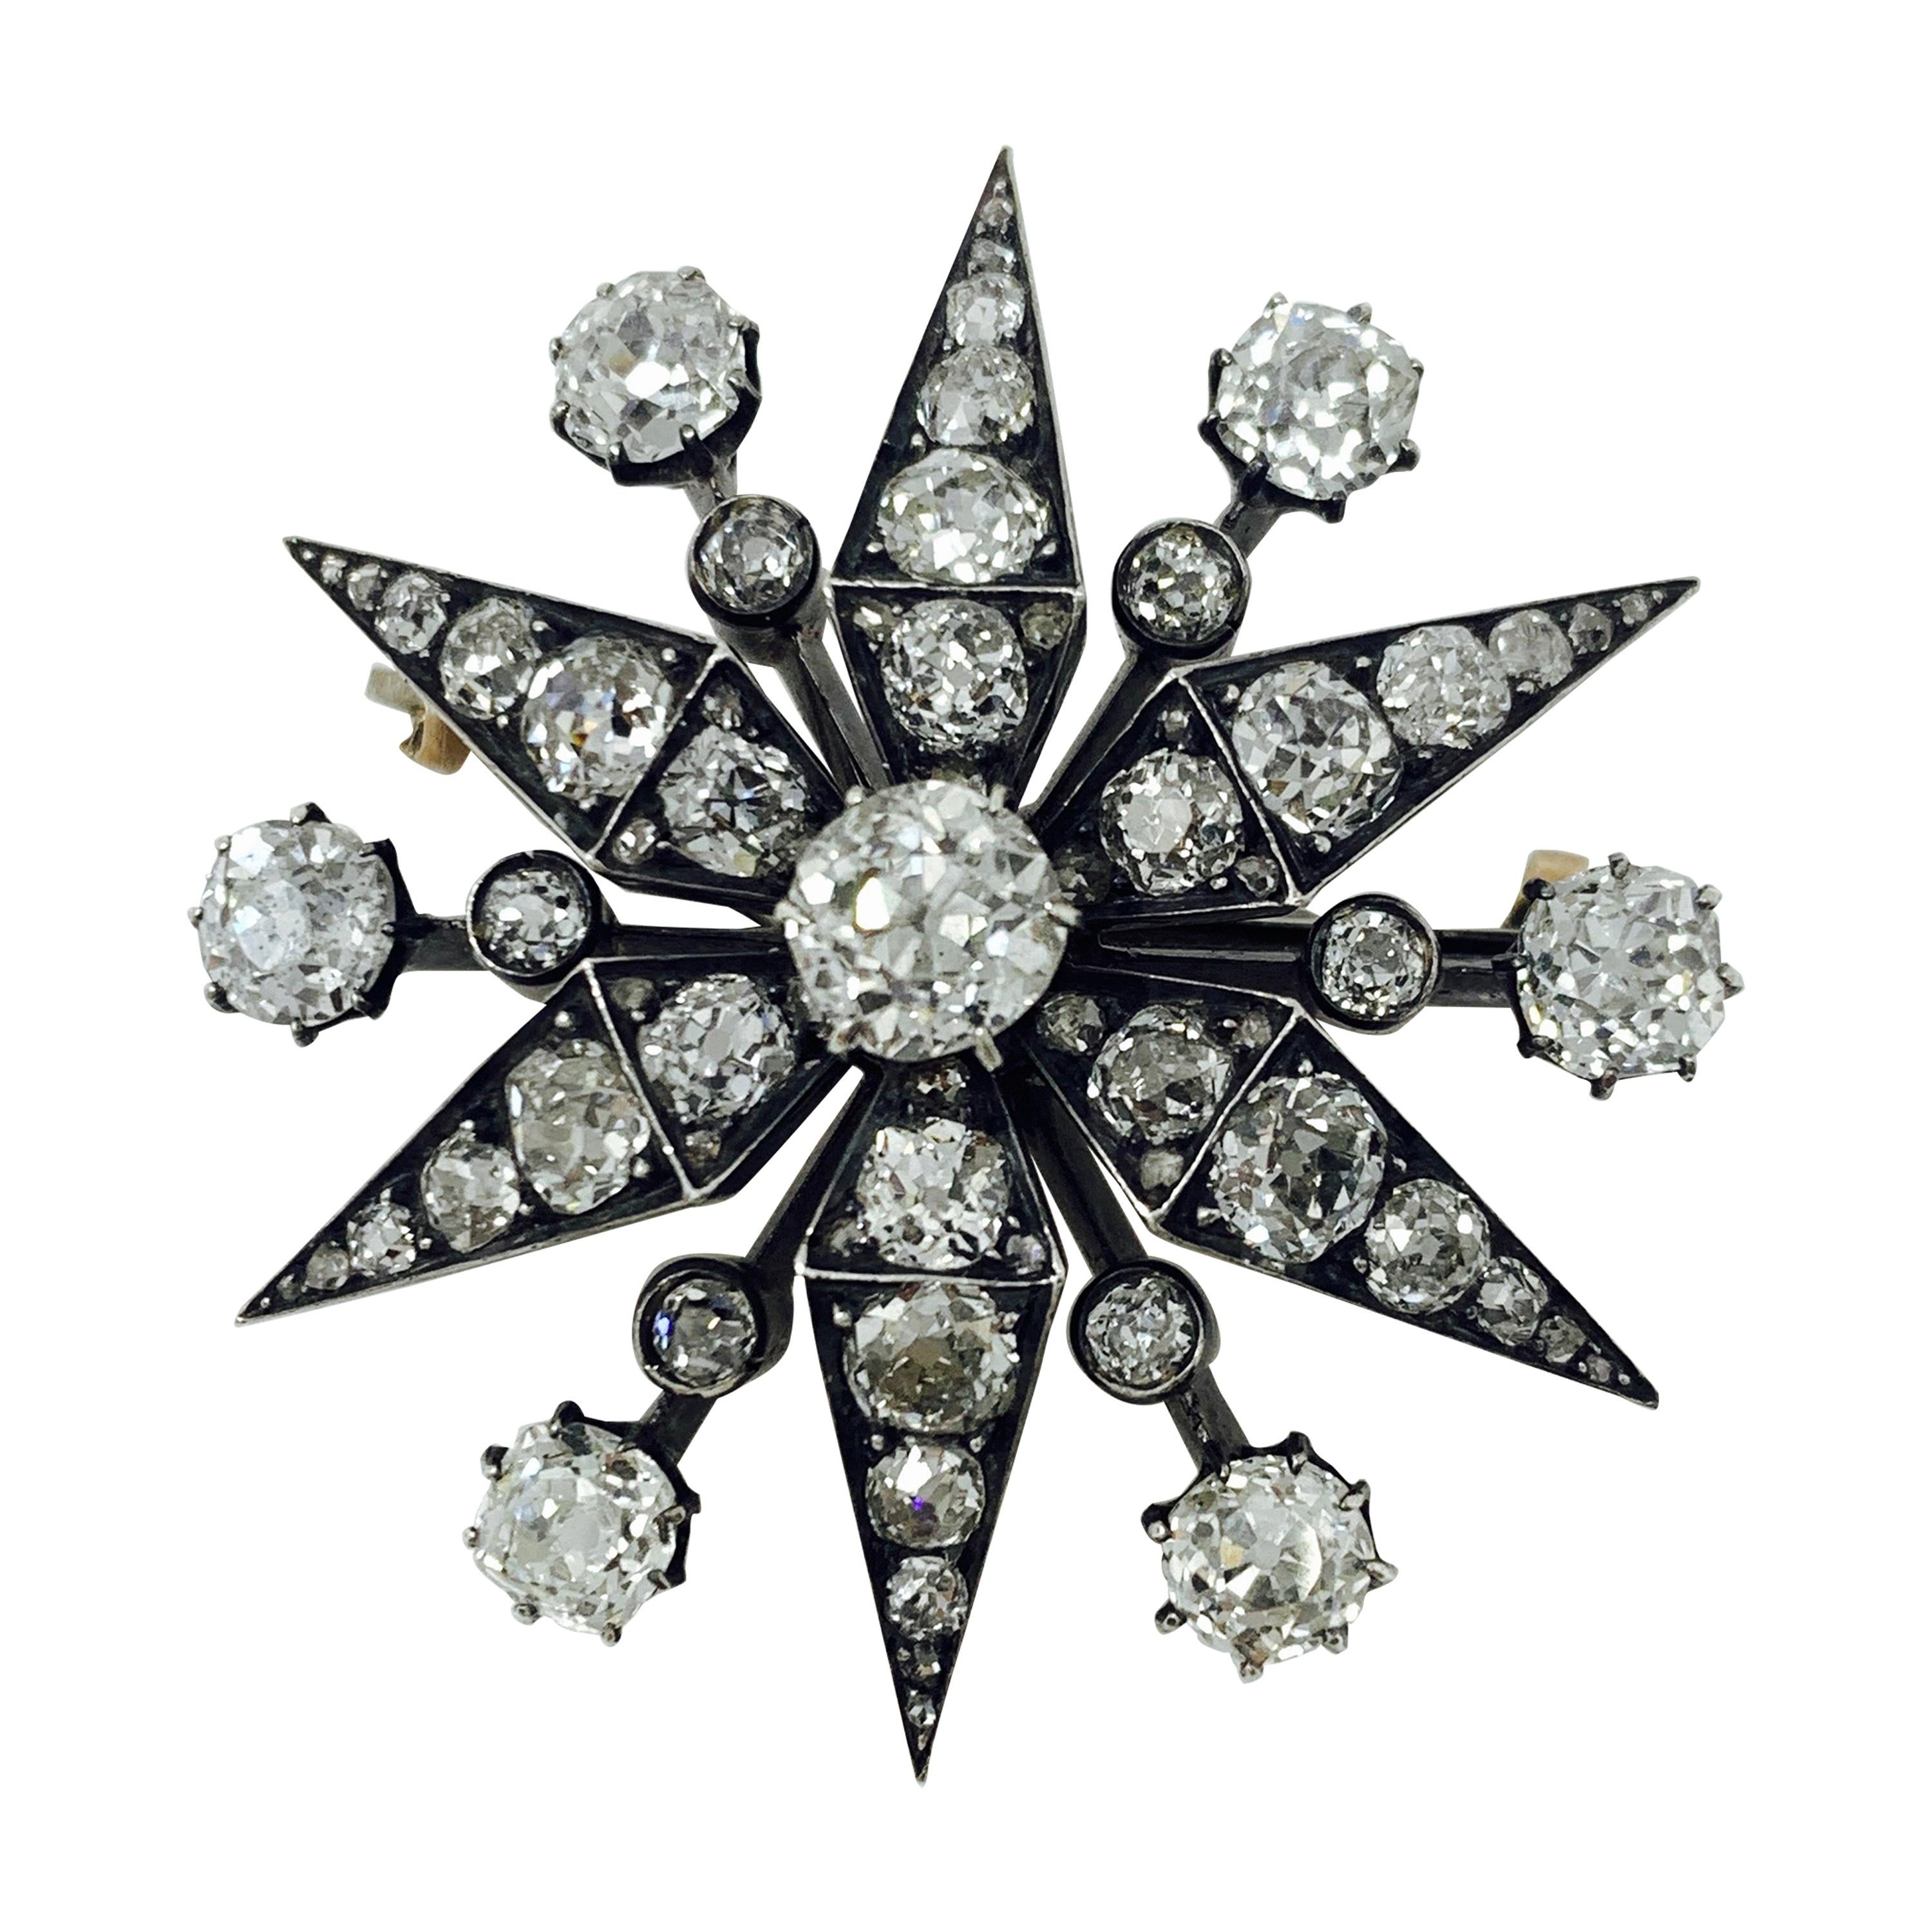 Antique 1880-1910 White Old Cut Diamond Broach For Sale